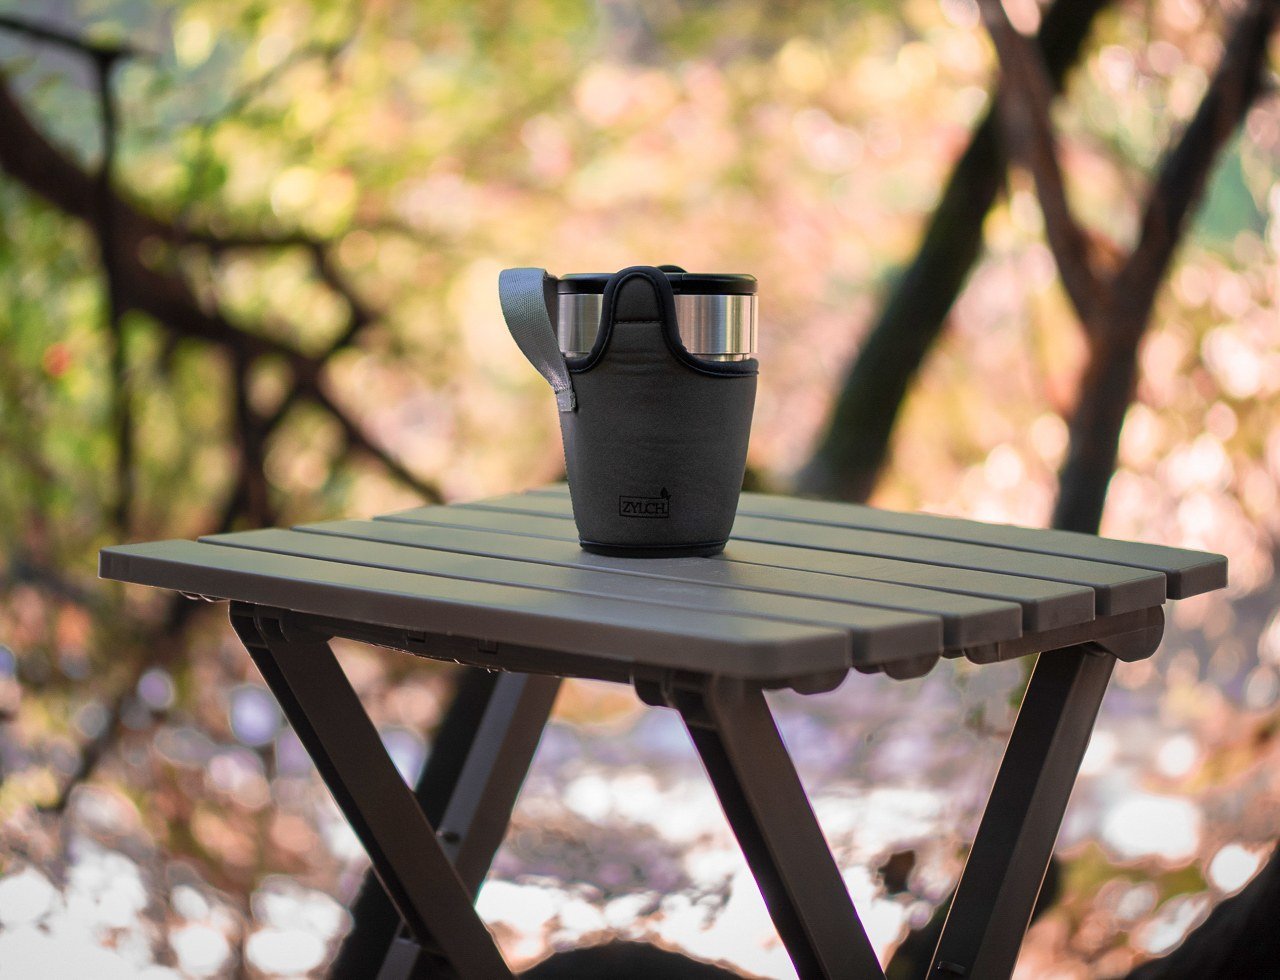 ZYLCH collapsible stainless steel cup helps protect the environment and  fits in your pocket, too - Yanko Design